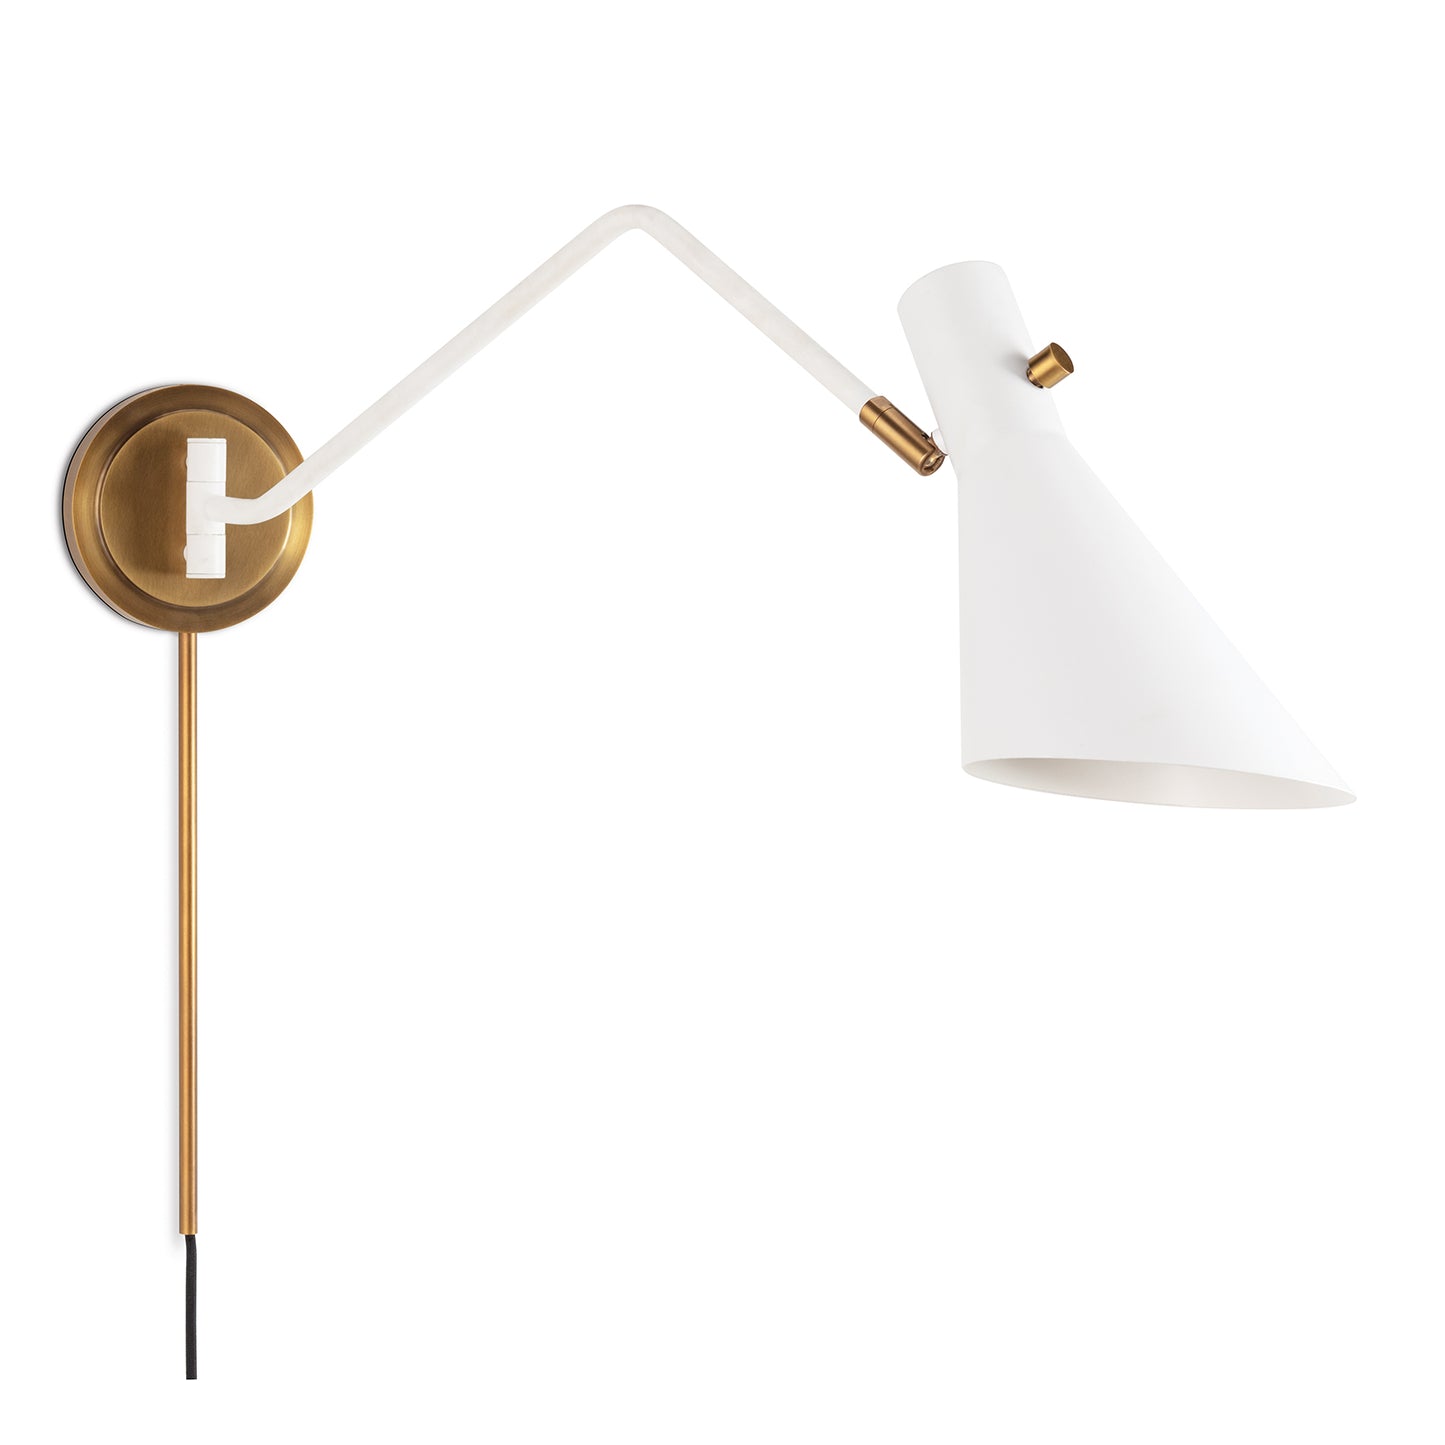 Spyder Single Arm Sconce in White and Natural Brass by Regina Andrew